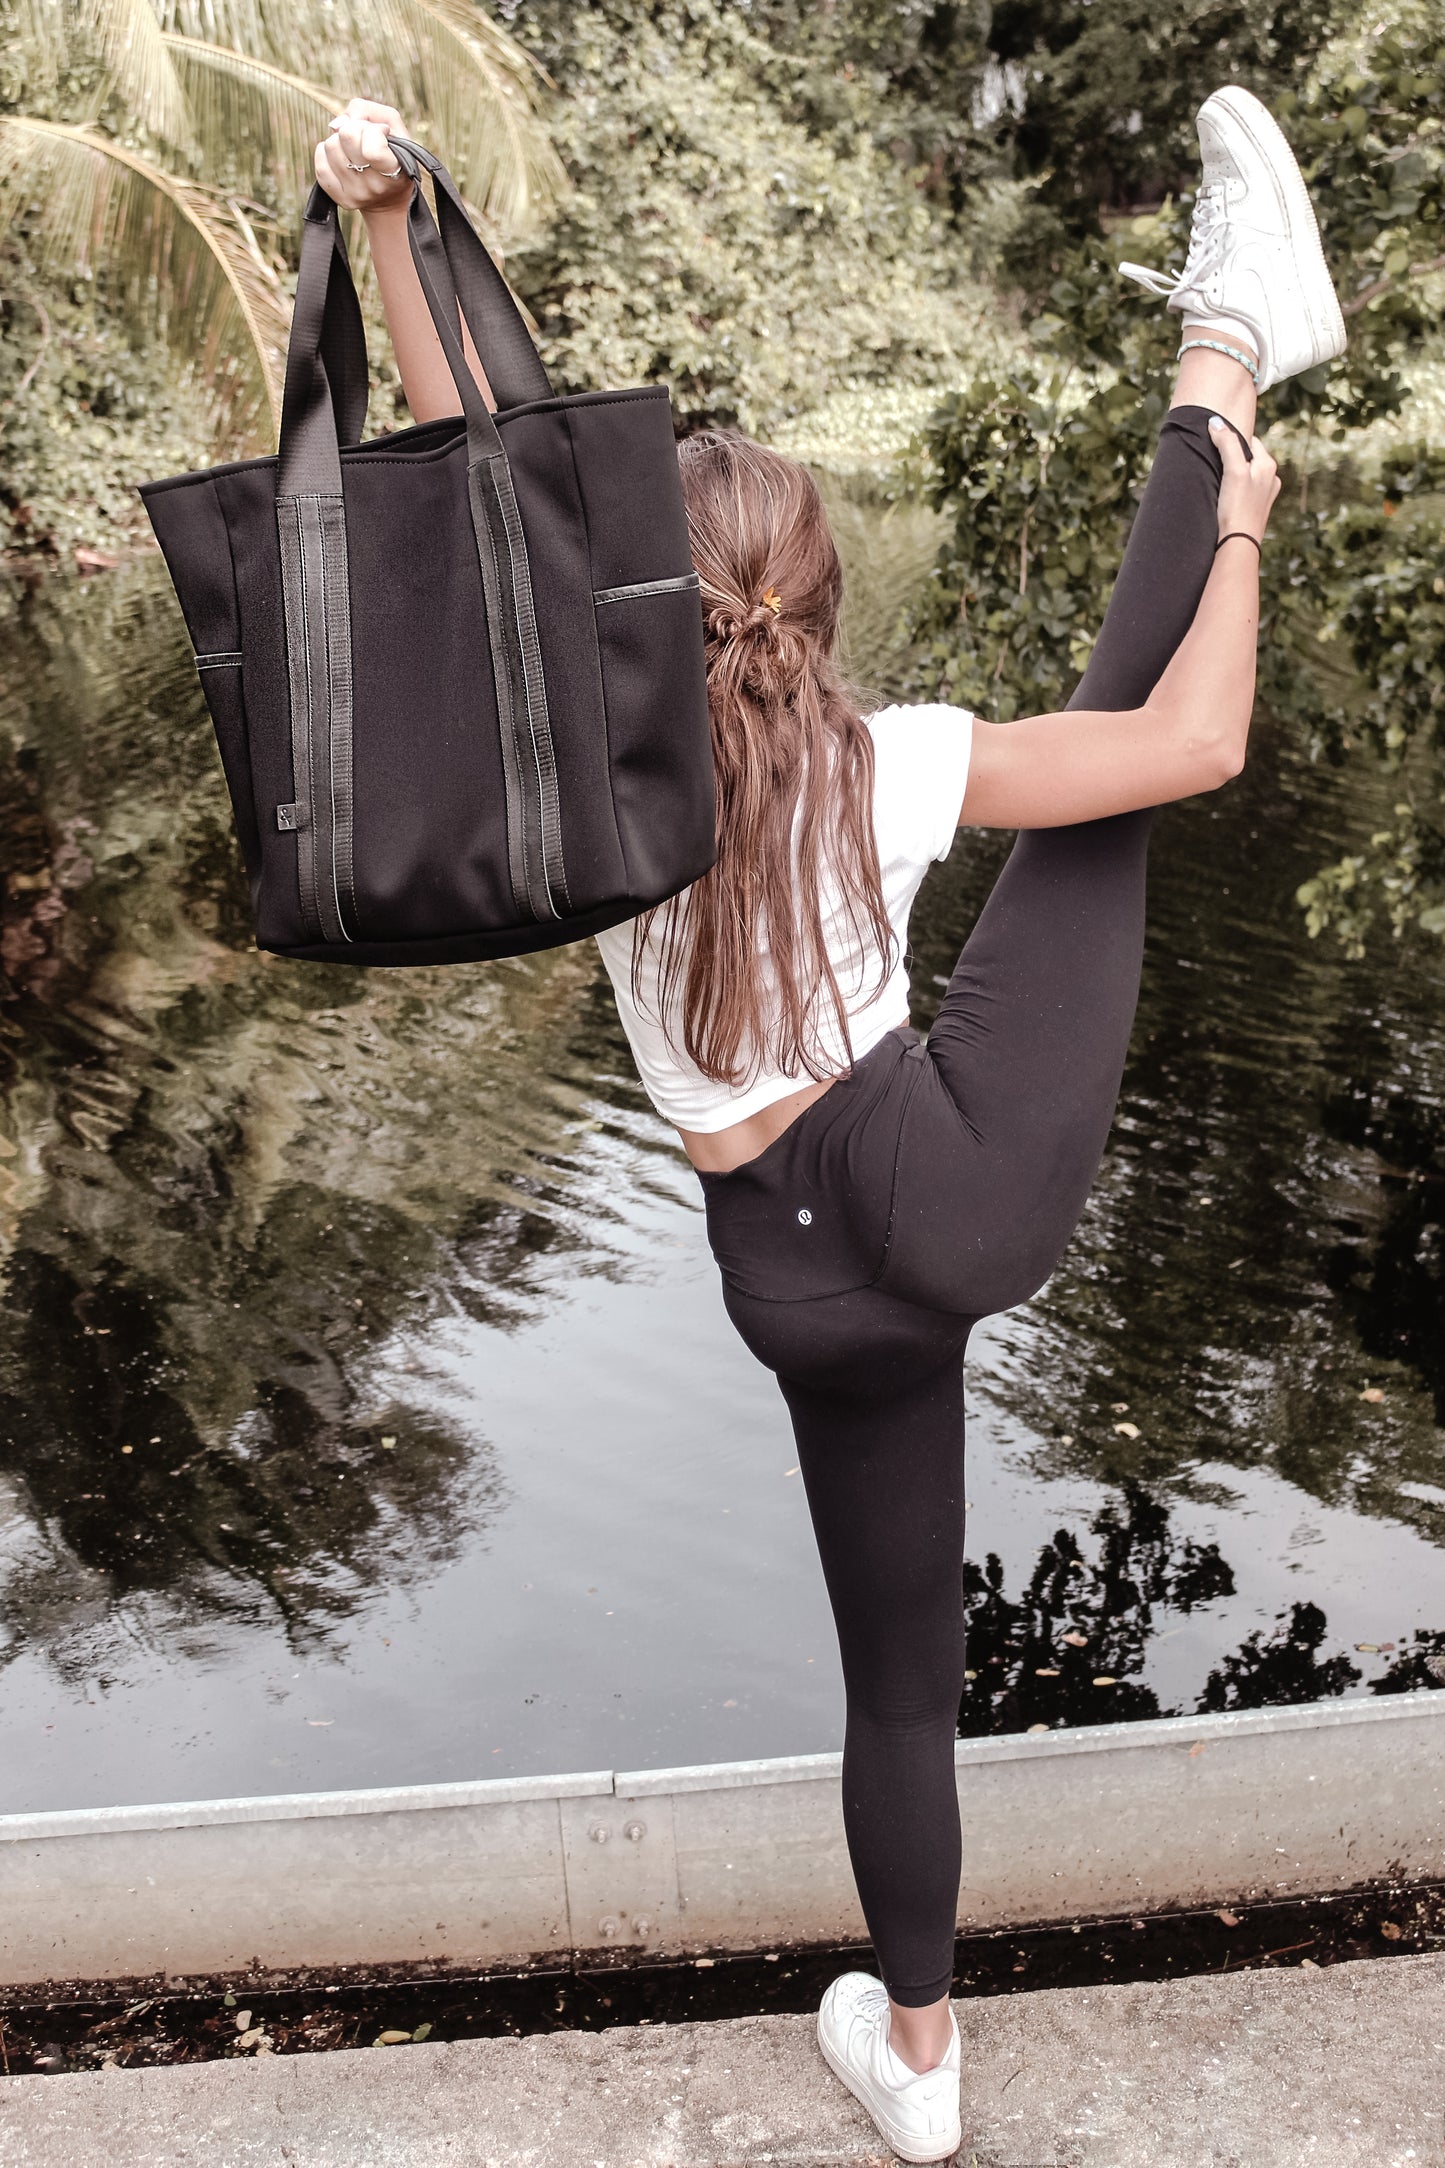 Person holding the Anya & Niki Hawthorne Tote - a black neoprene tote bag with high shine cinch top closure and leather details.